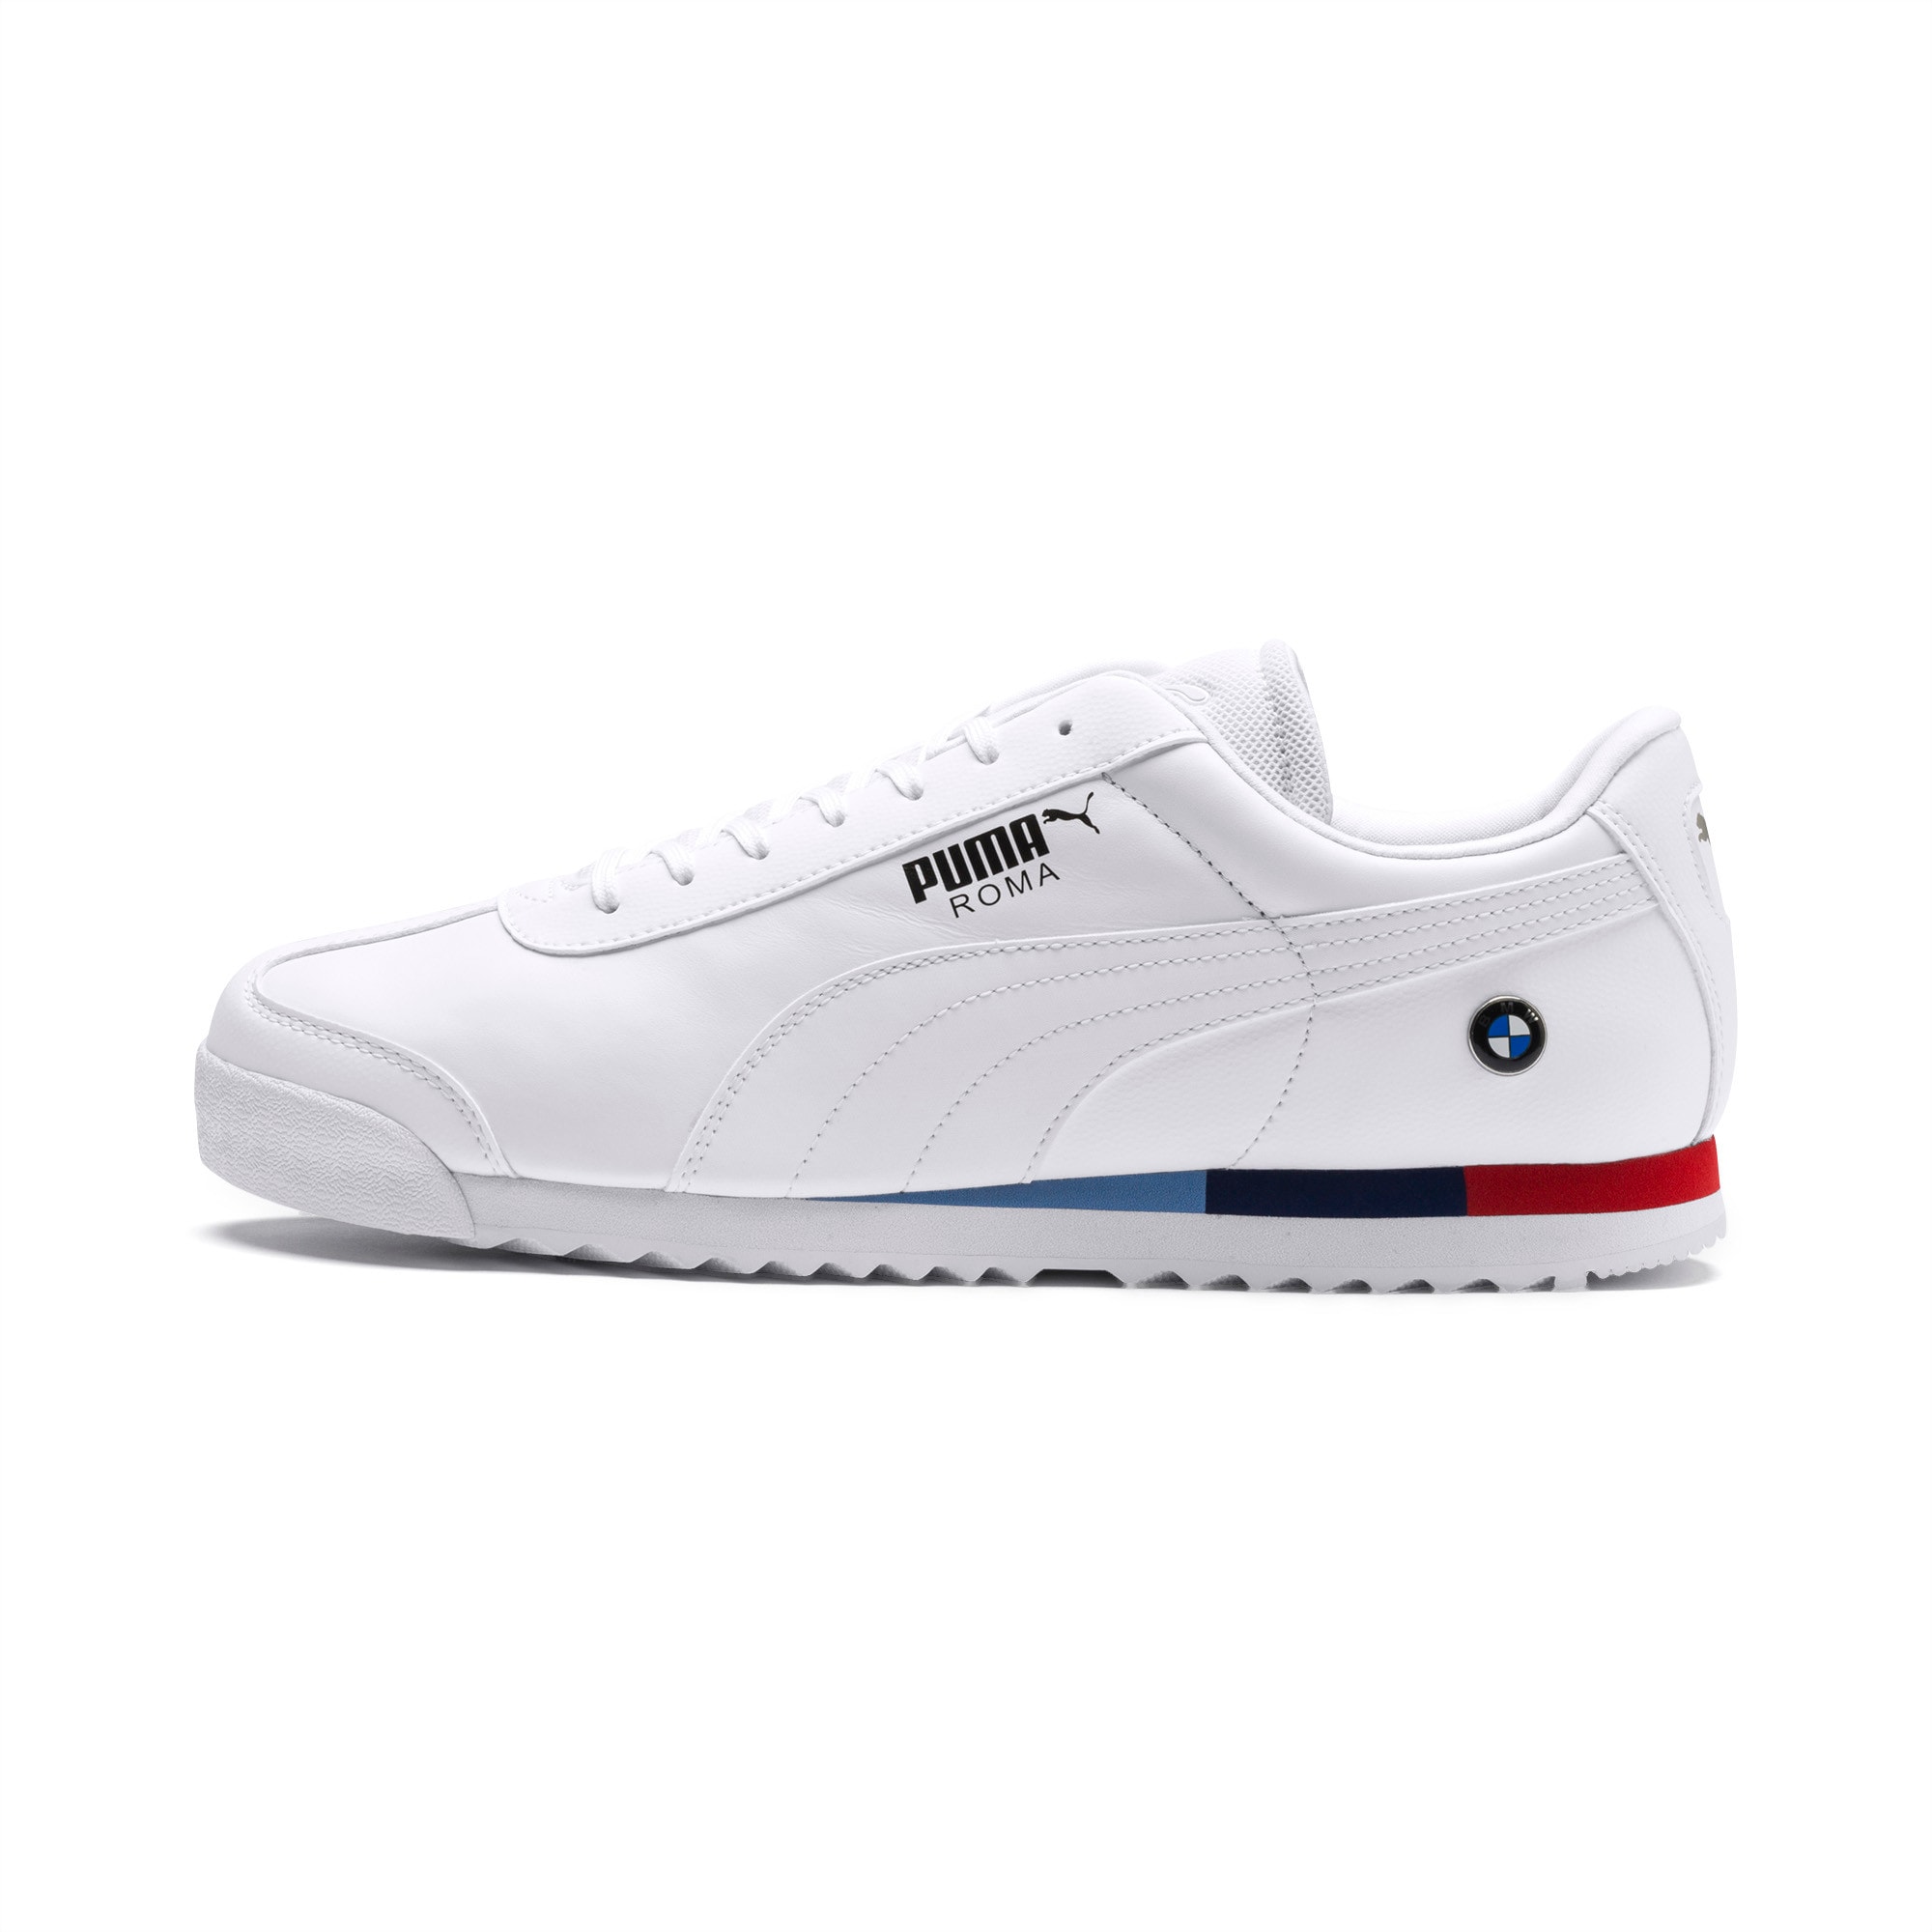 puma bmw shoes online shopping in india